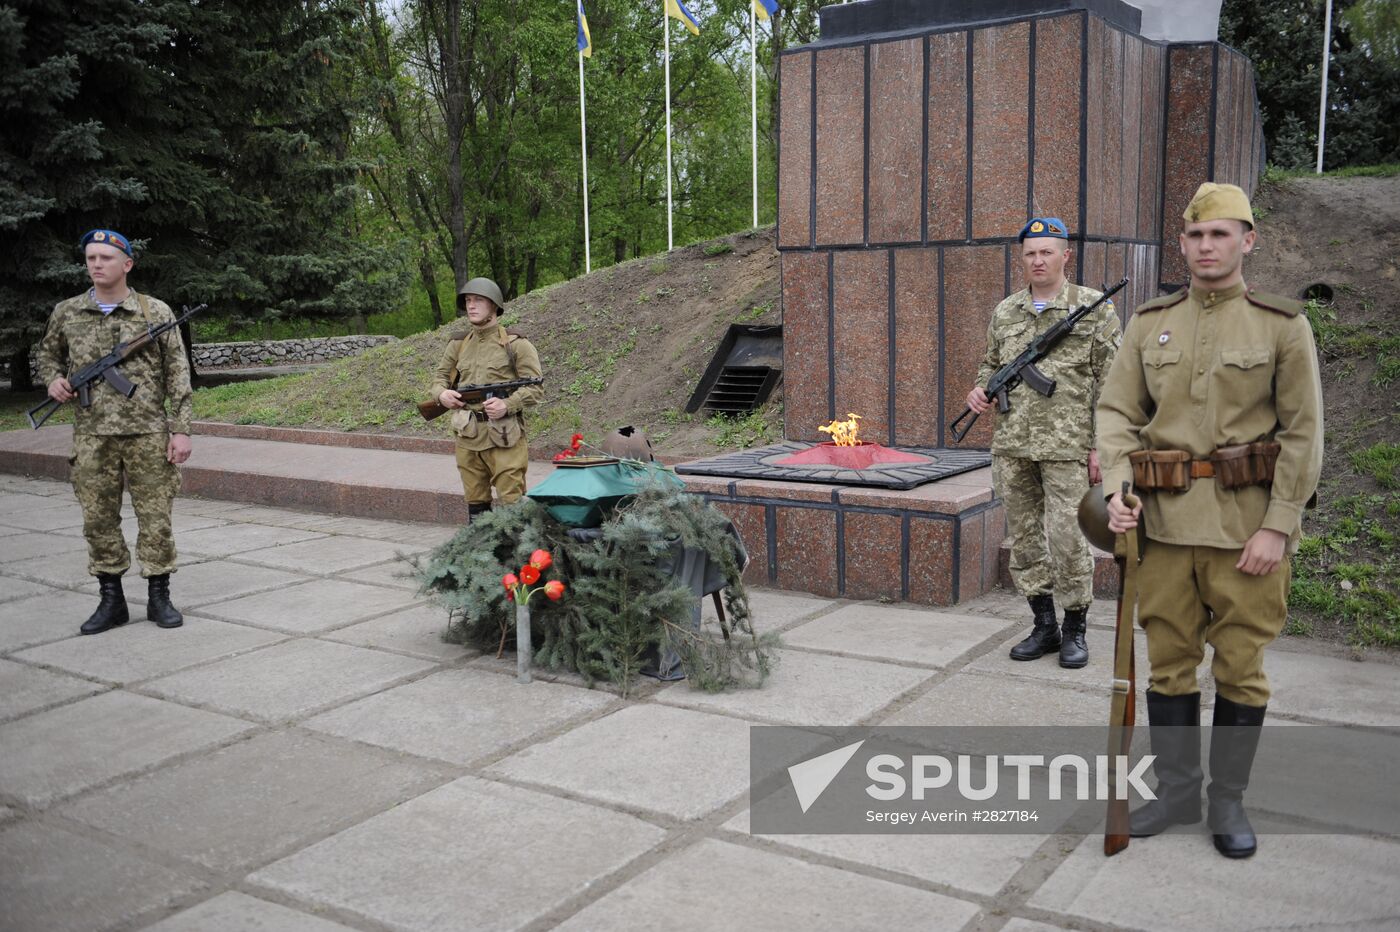 Transfer to Russia of remains of solder killed in 1943 in battle of Slavyansk